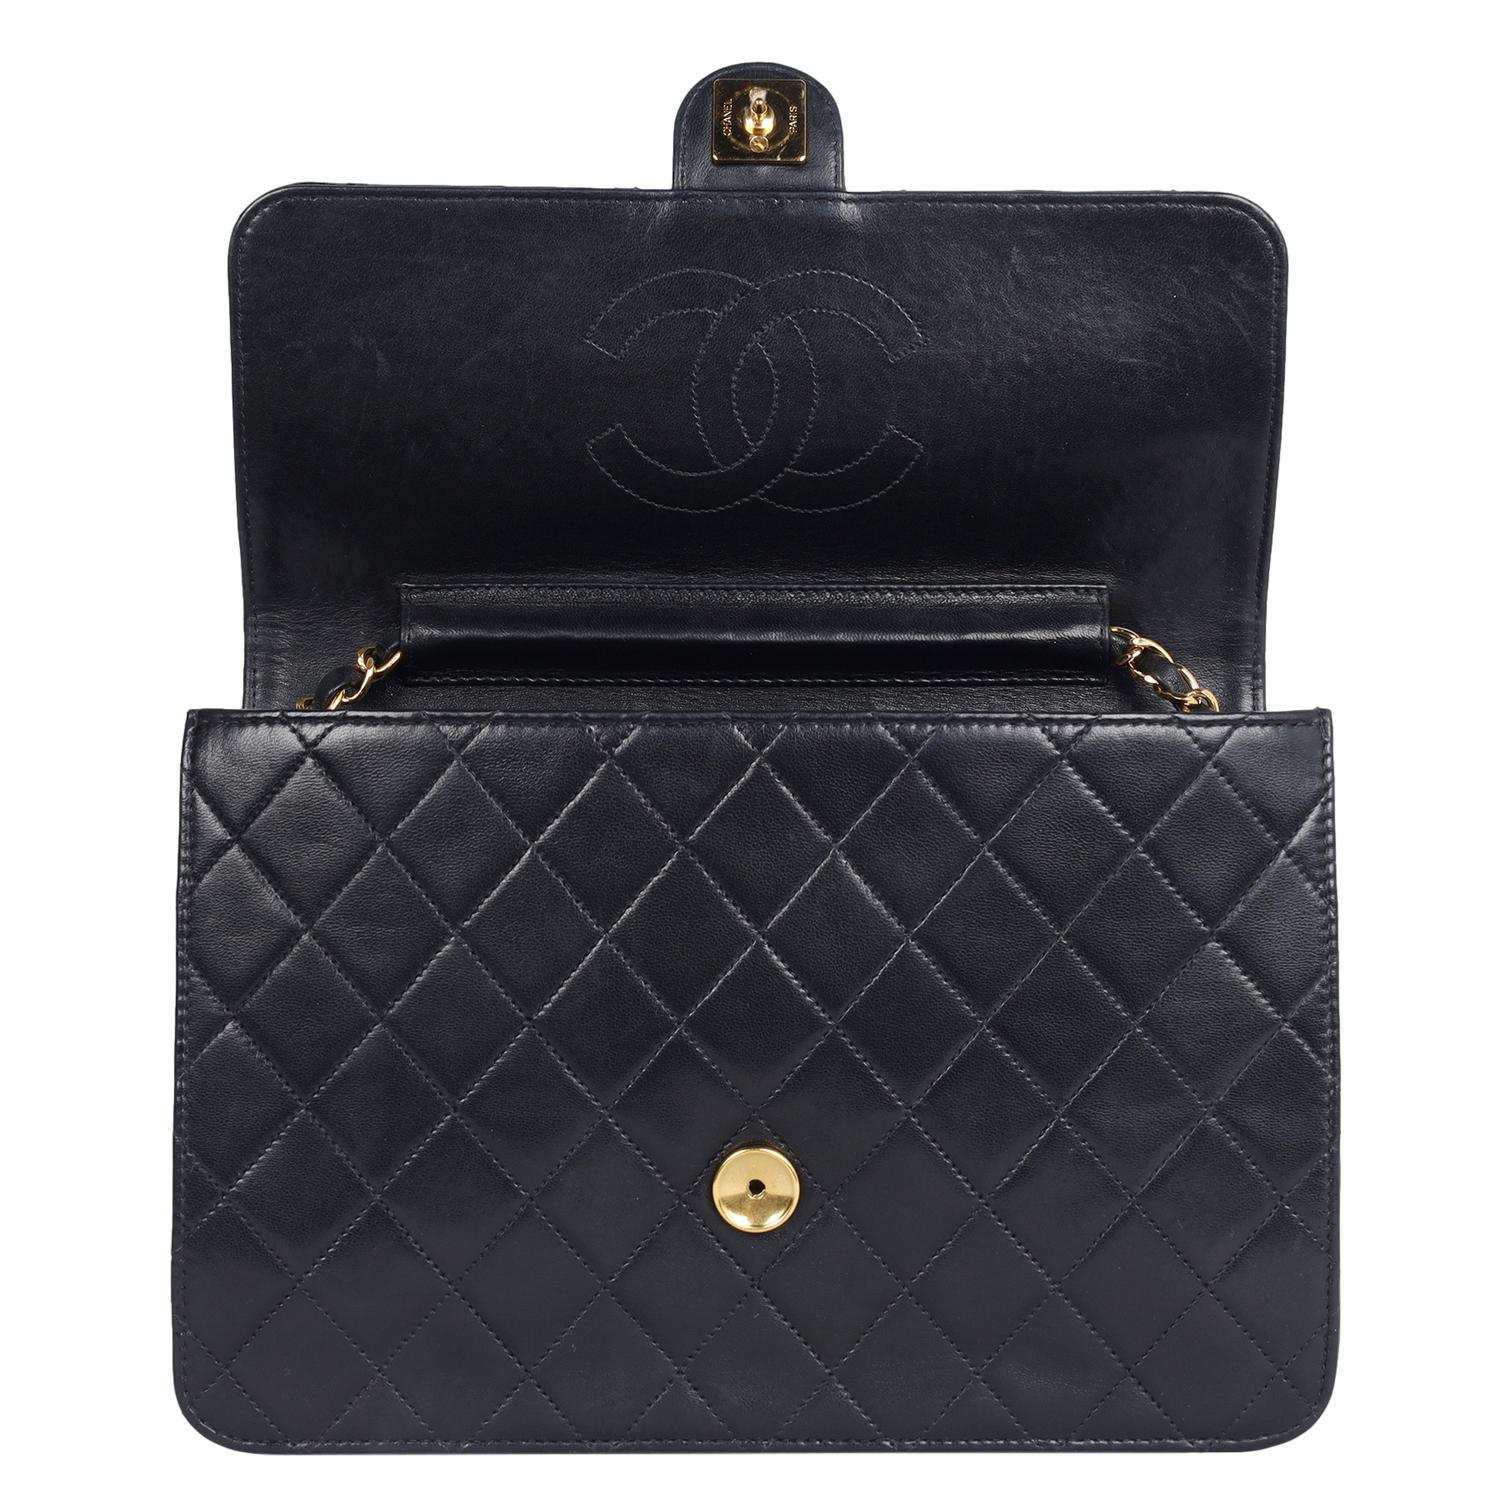 Chanel Black Classic Front Flap Quilted Leather Shoulder Bag For Sale 4